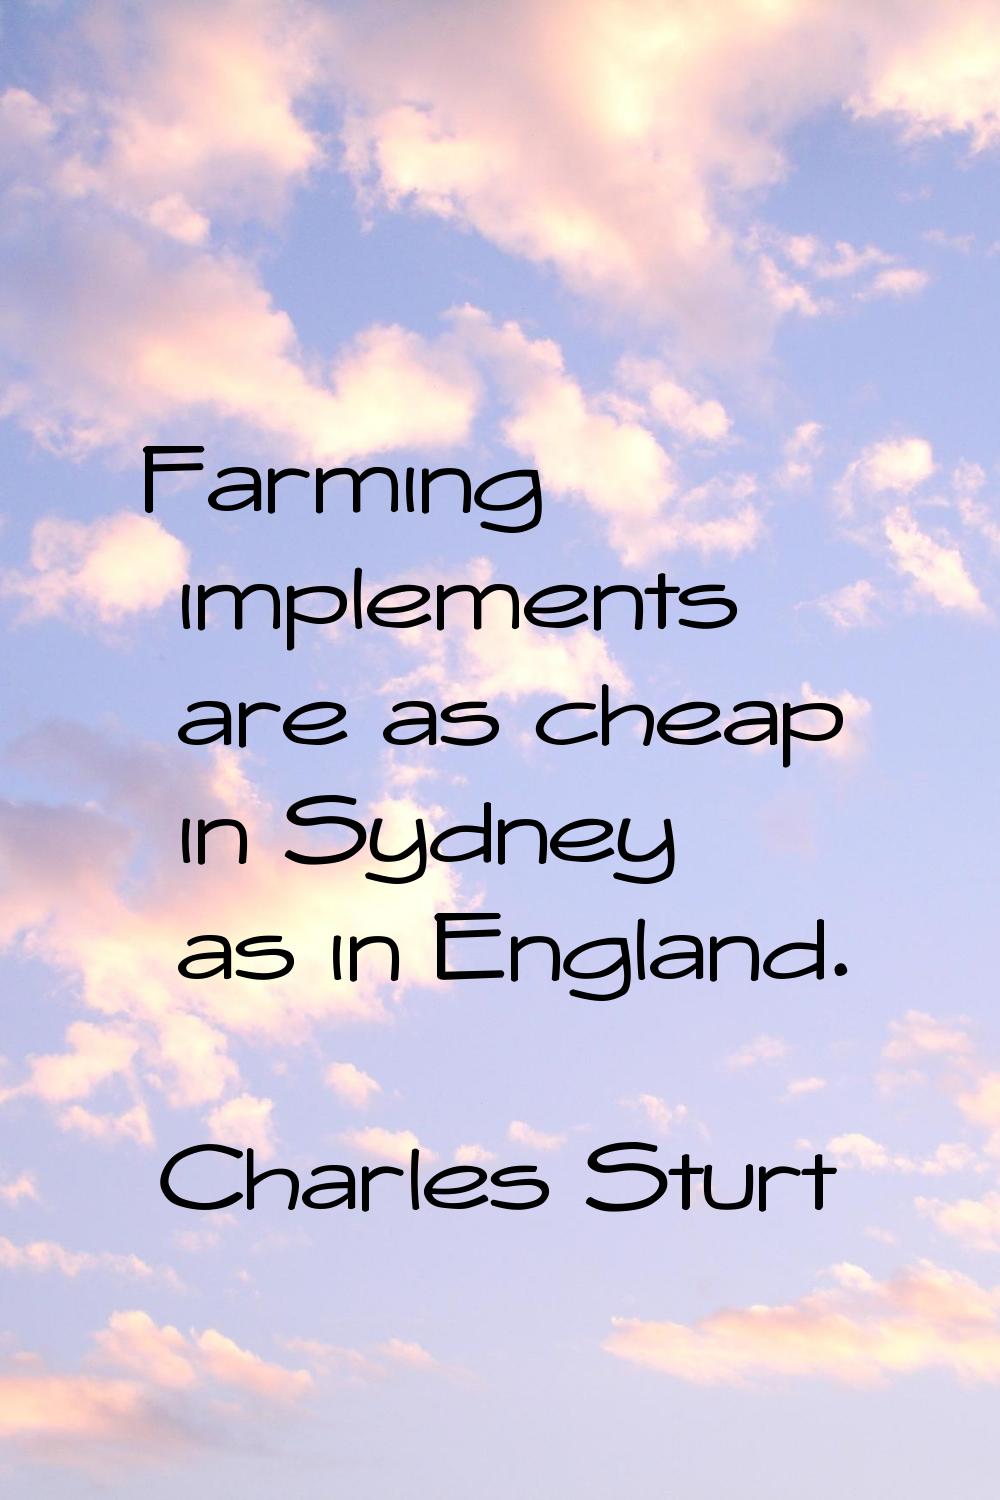 Farming implements are as cheap in Sydney as in England.